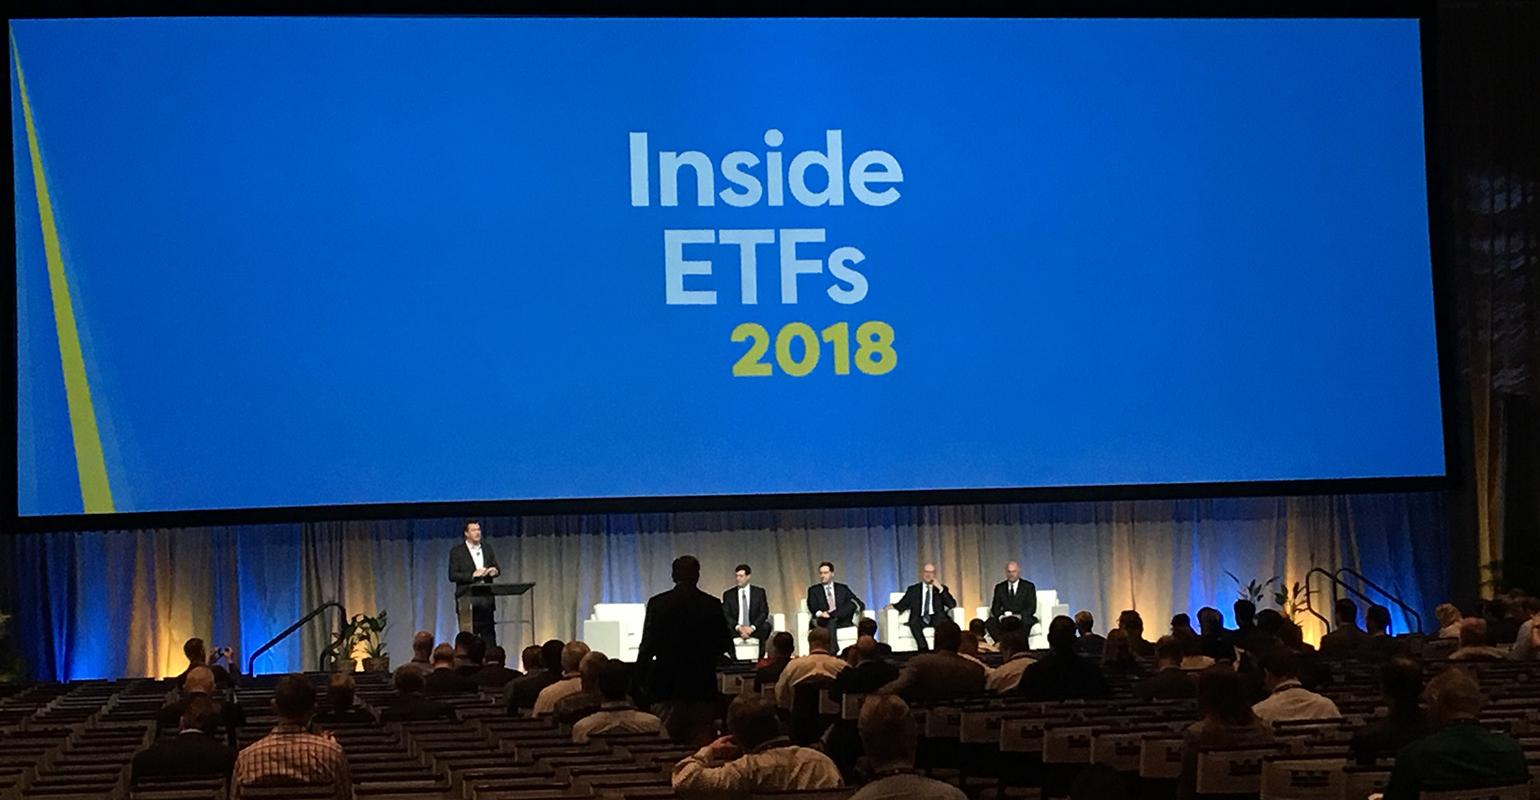 Inside ETFs Investment Panel Sees Bright Year for Stocks, Commodities